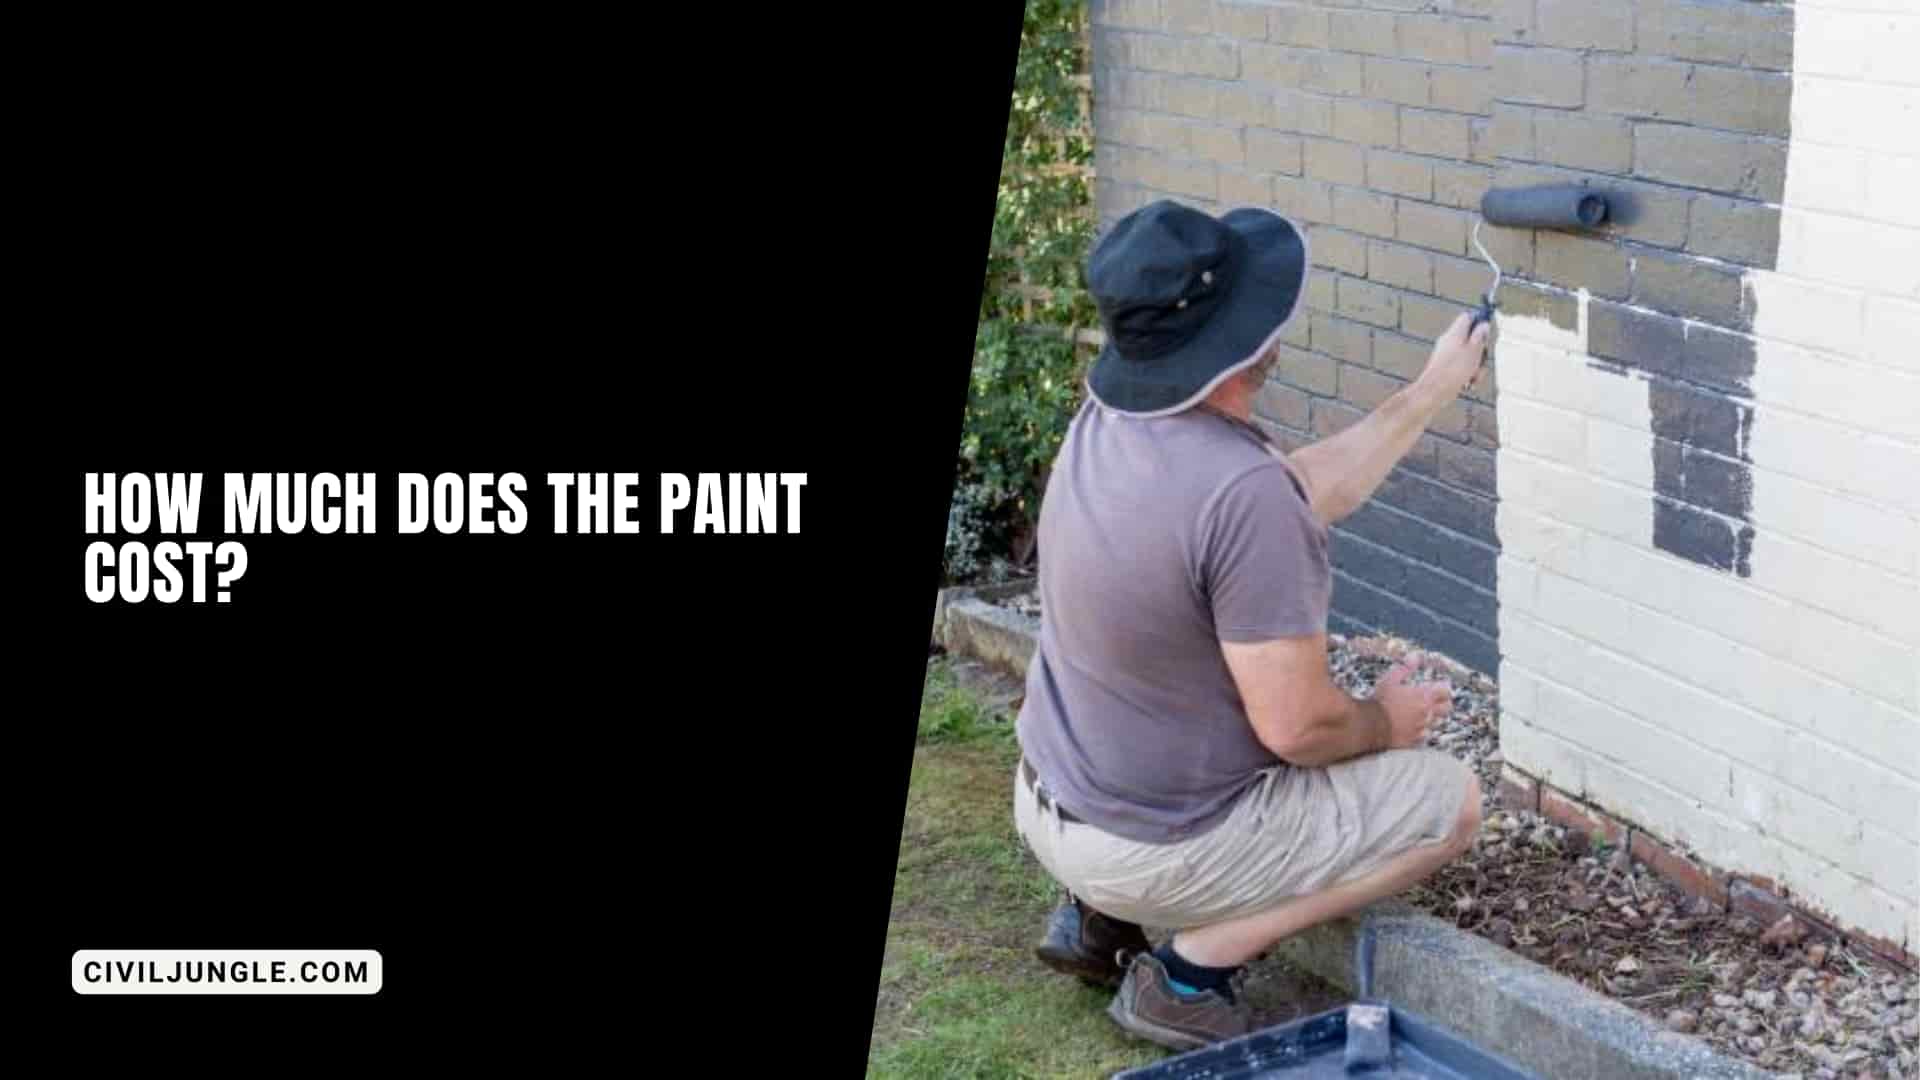 How Much Does the Paint Cost?